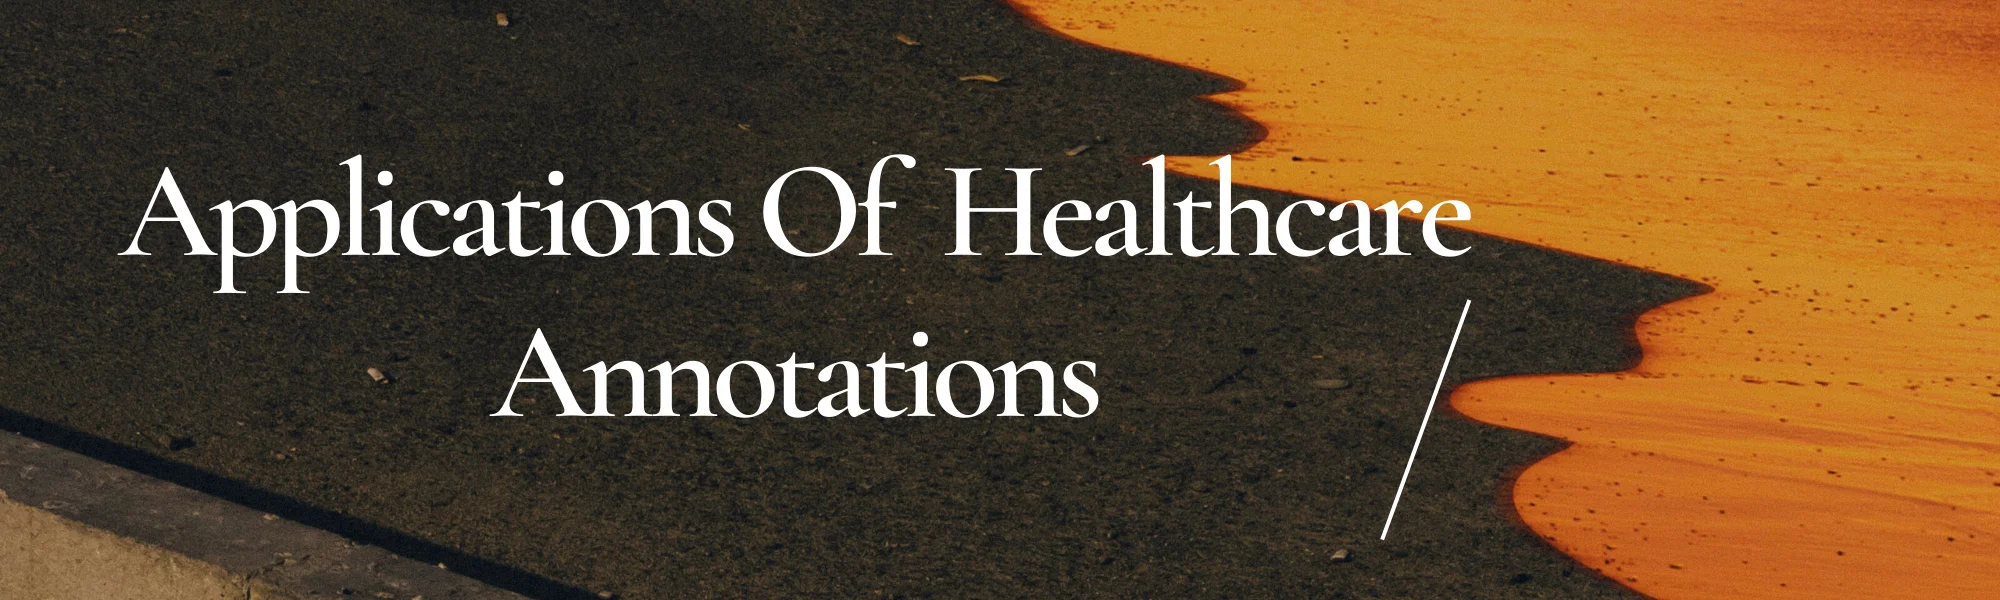 Applications Of Healthcare Annotations